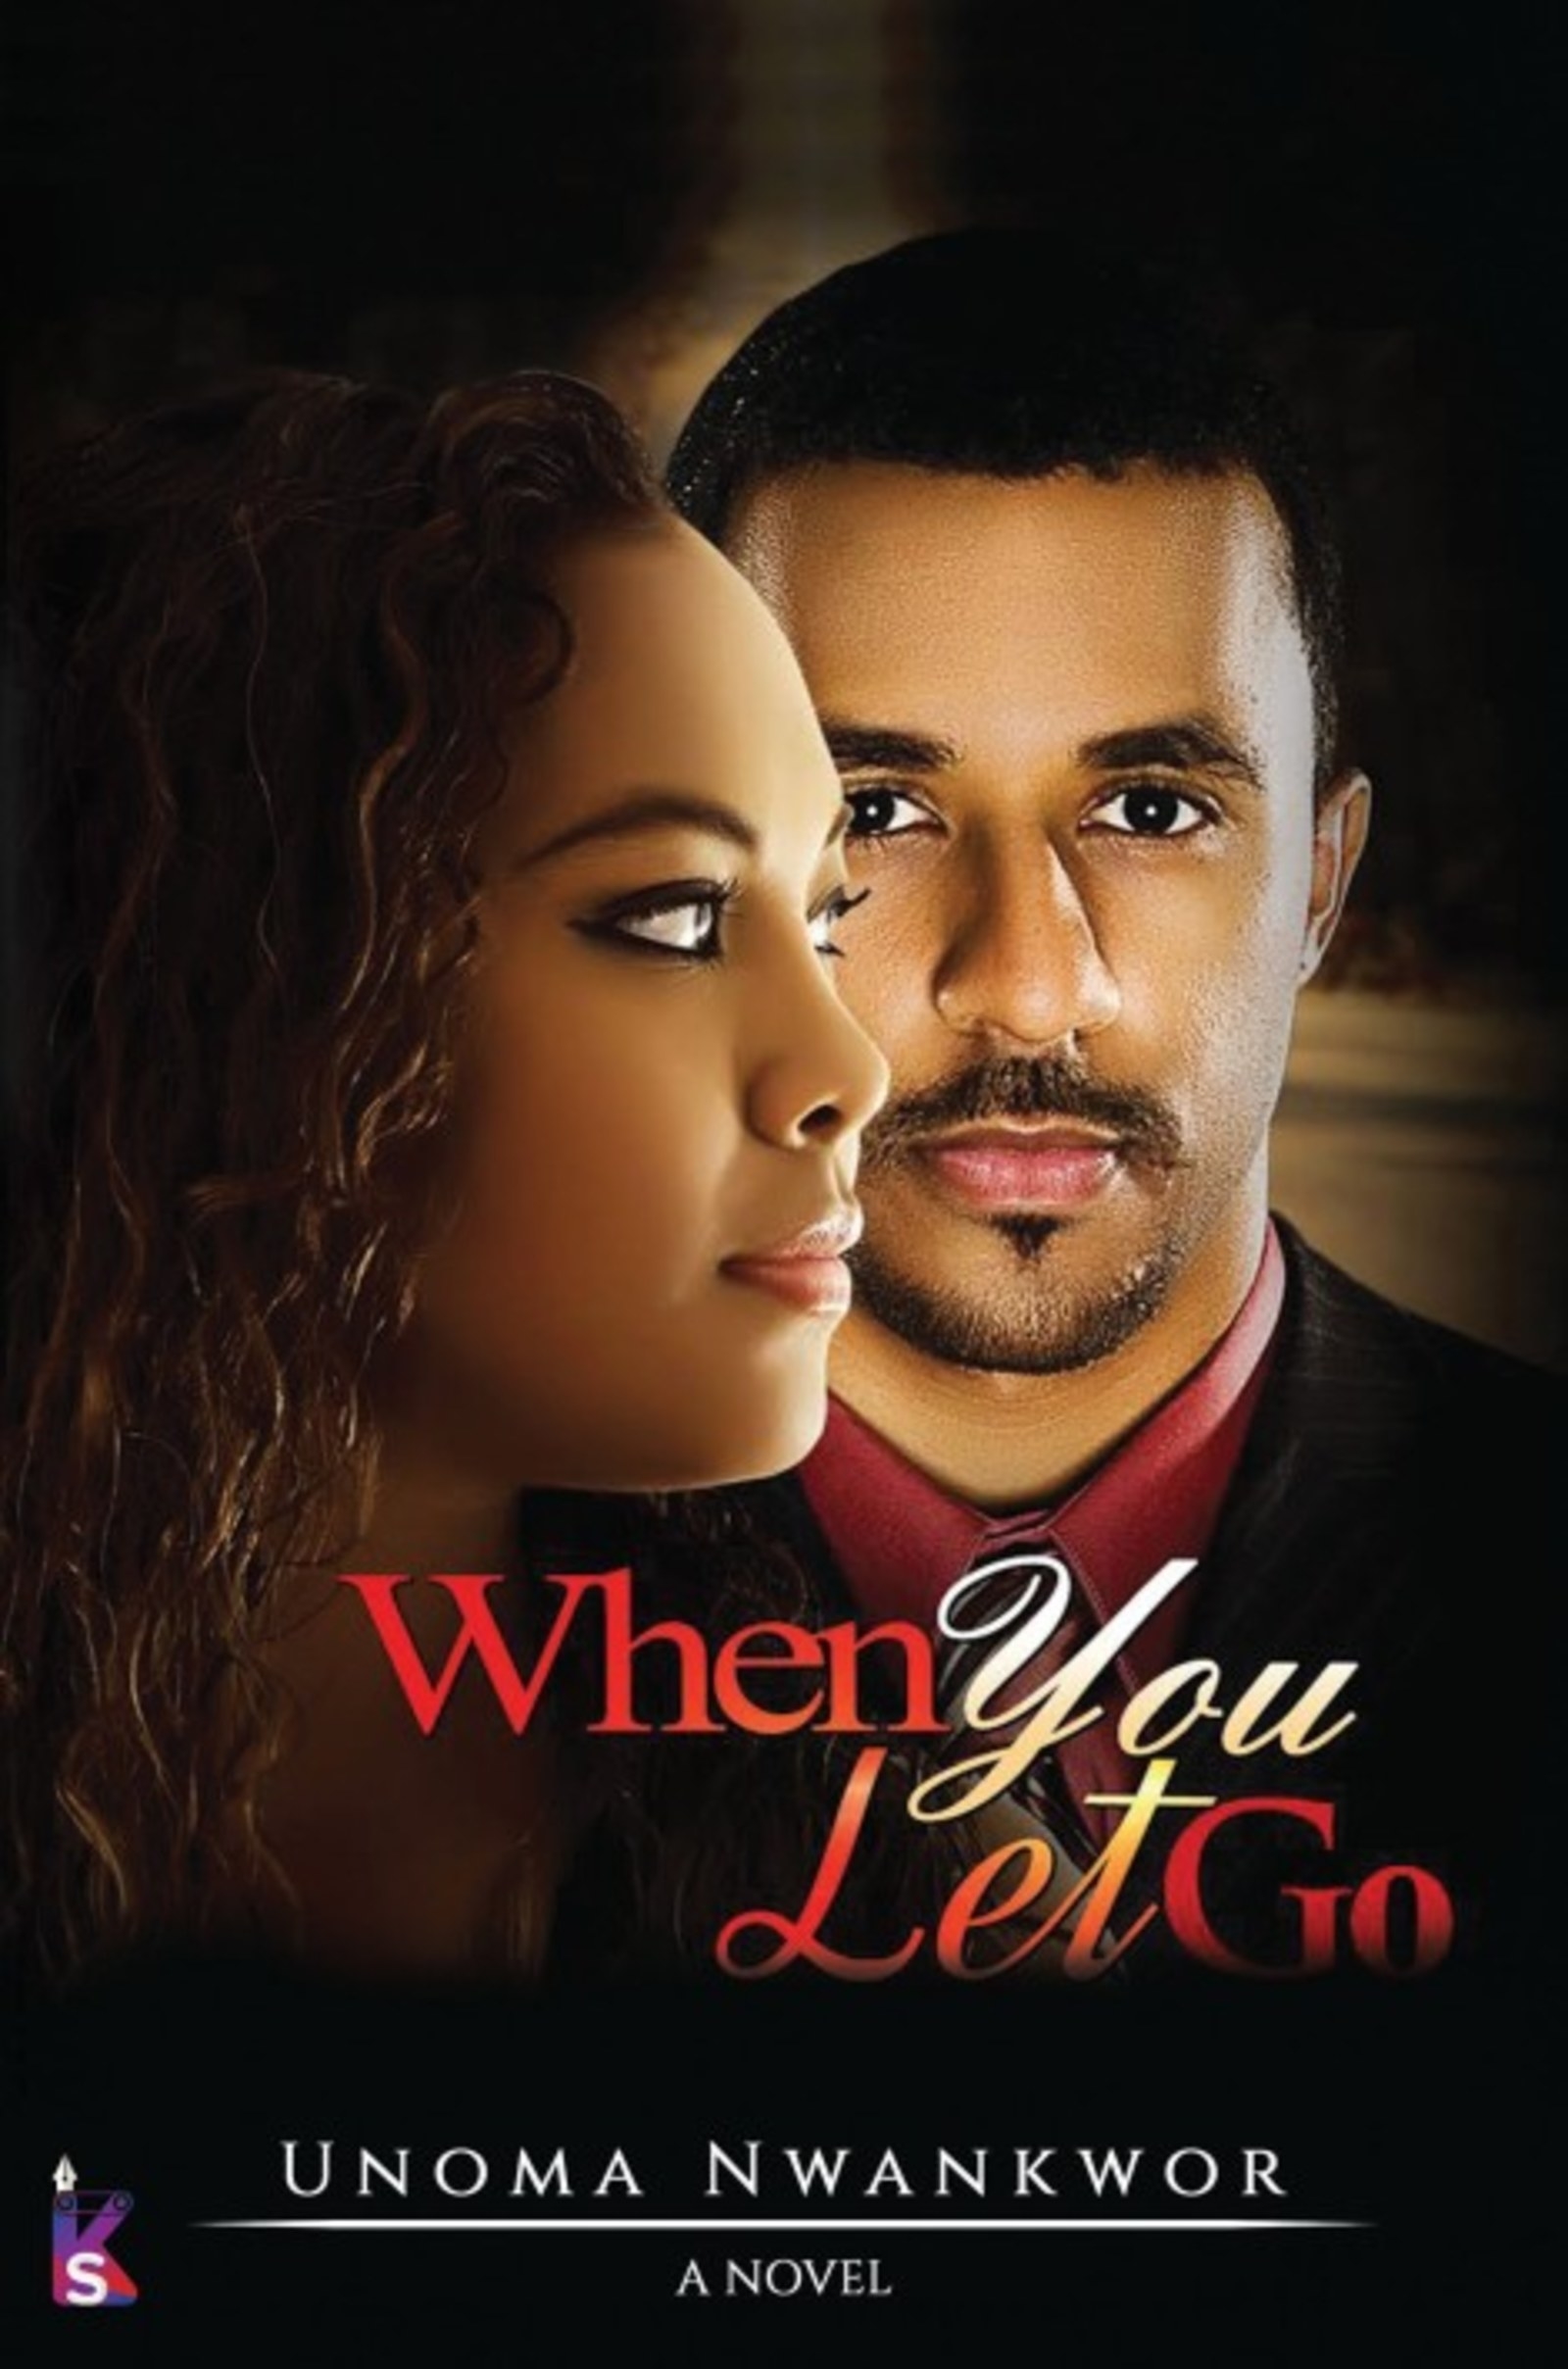 Book cover of When You Let Go by Unoma Nwankor